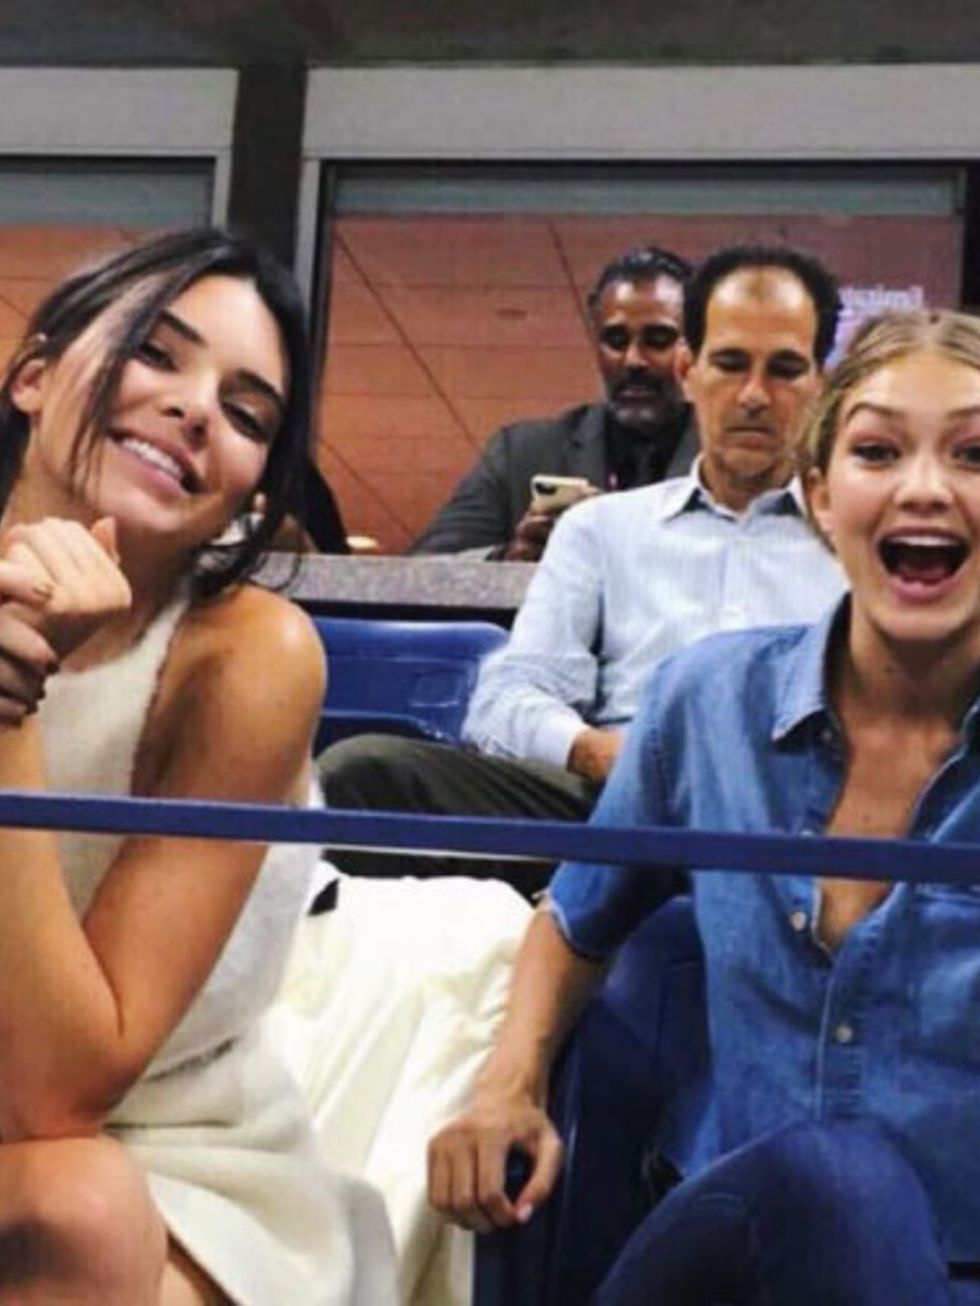 Kendall and Gigi at the US Open